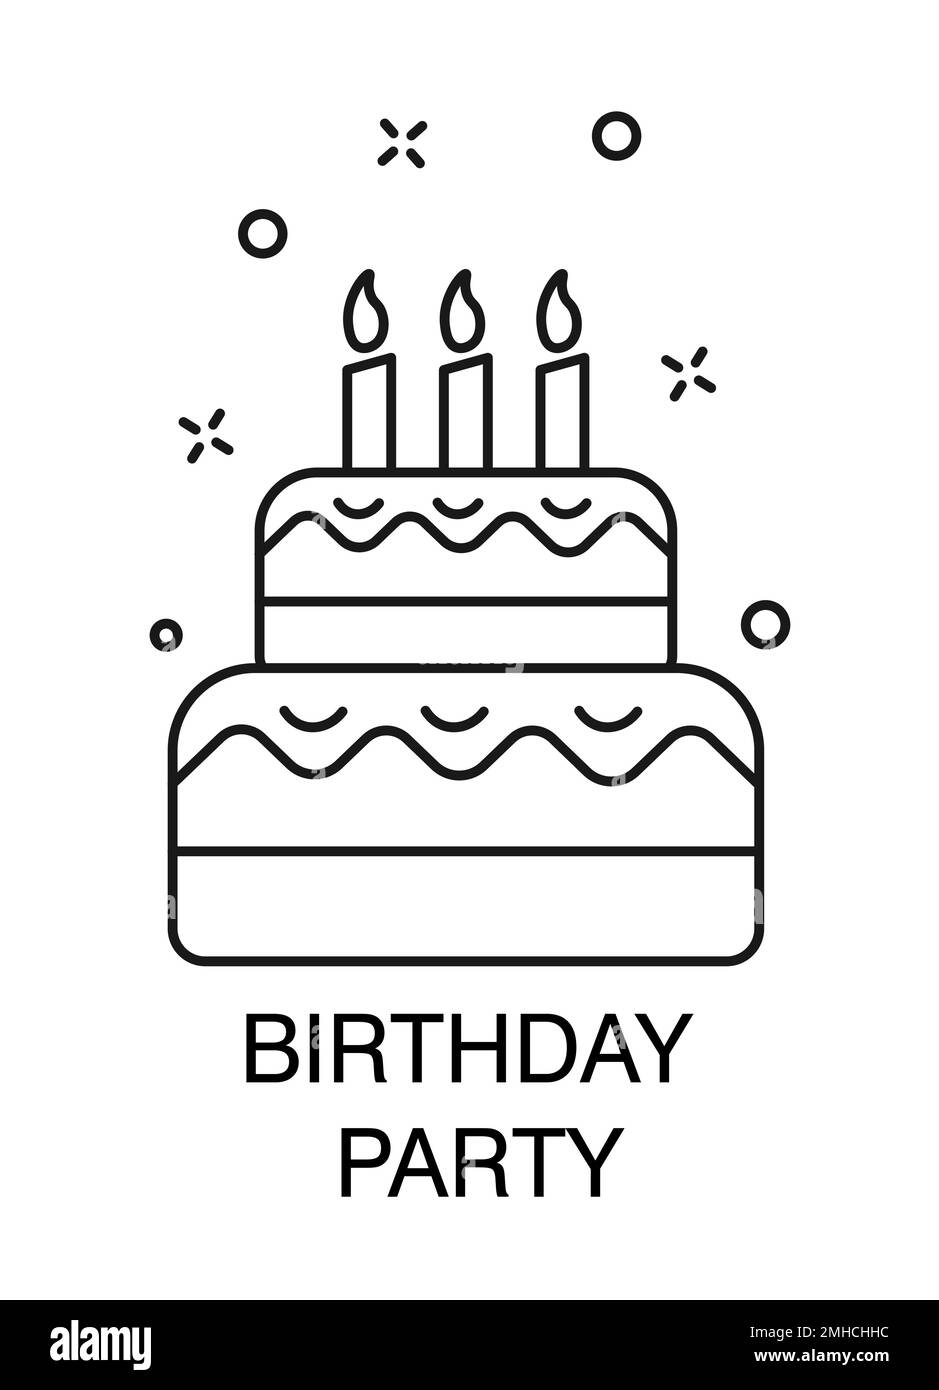 Cake with candles, birthday party celebration isolated outline icon Stock Vector